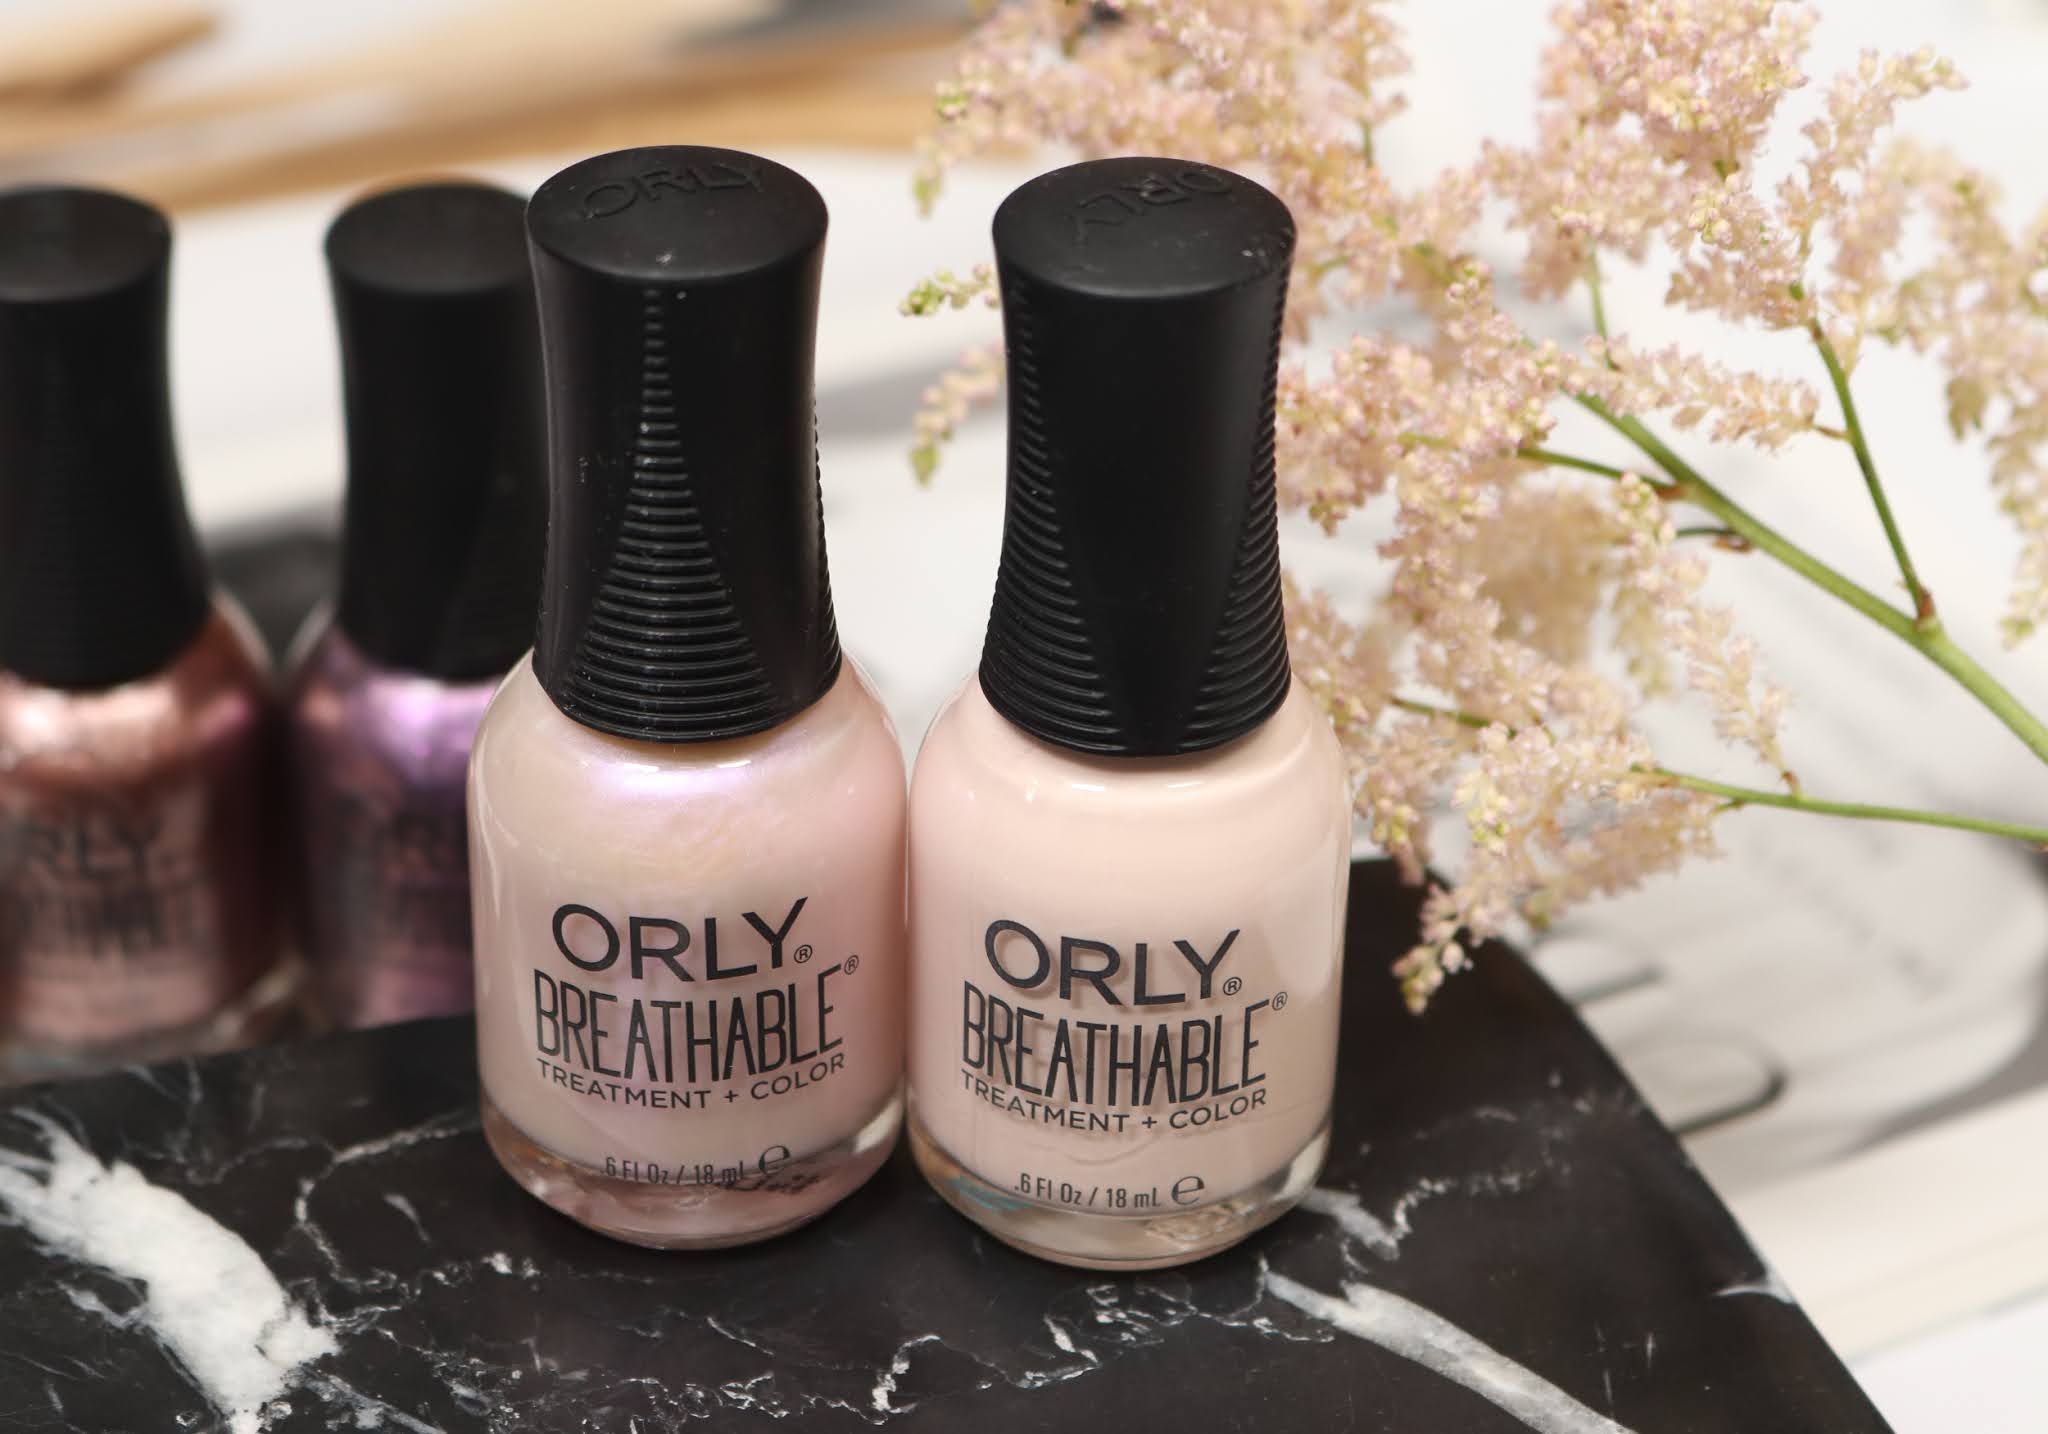 9. Orly Breathable Treatment + Color in "Love My Nails" - wide 2